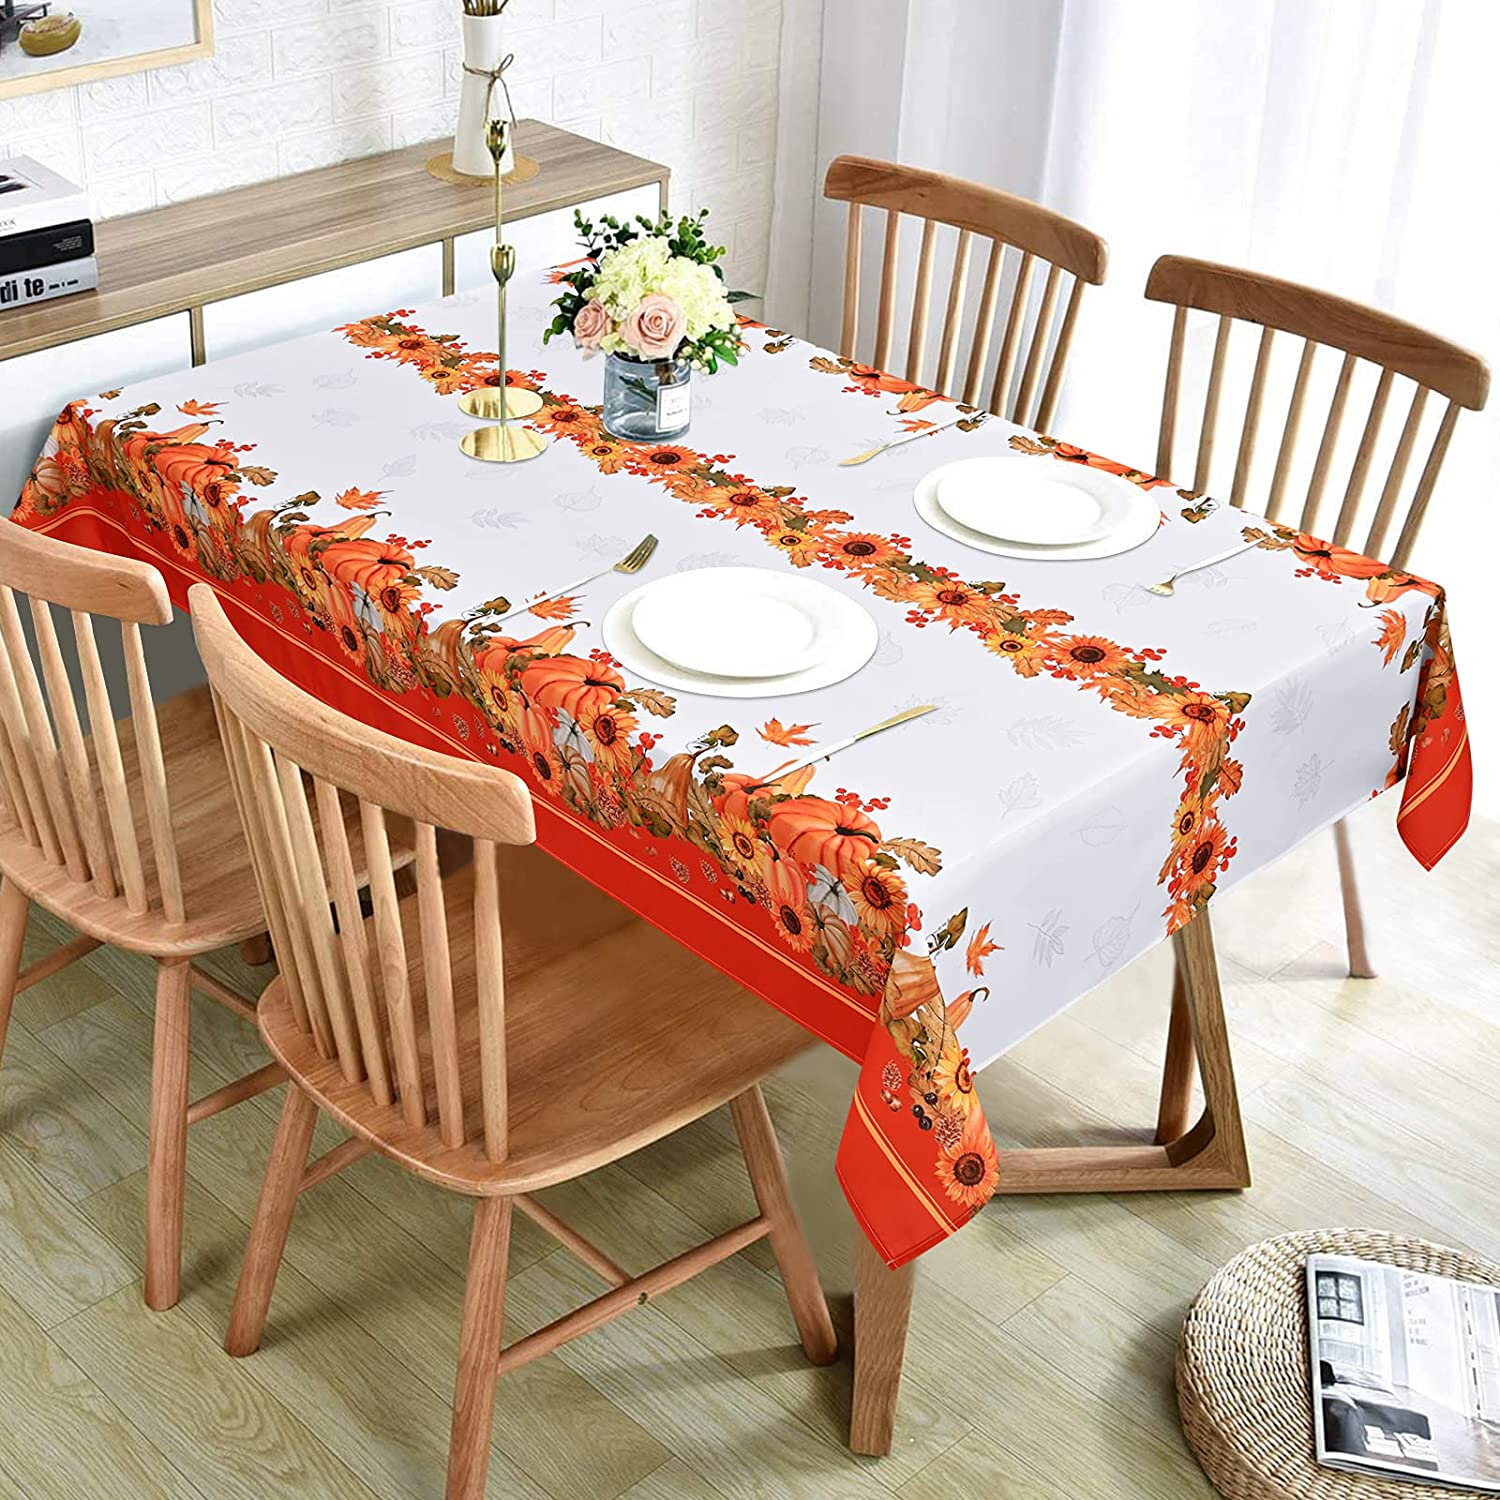 Autumn Leaves Falling Proof Spill-Proof and Water Resistance Tablecloth,Decorative Fabric Table Cover for Outdoor and Indoor 60 X 90 Inch